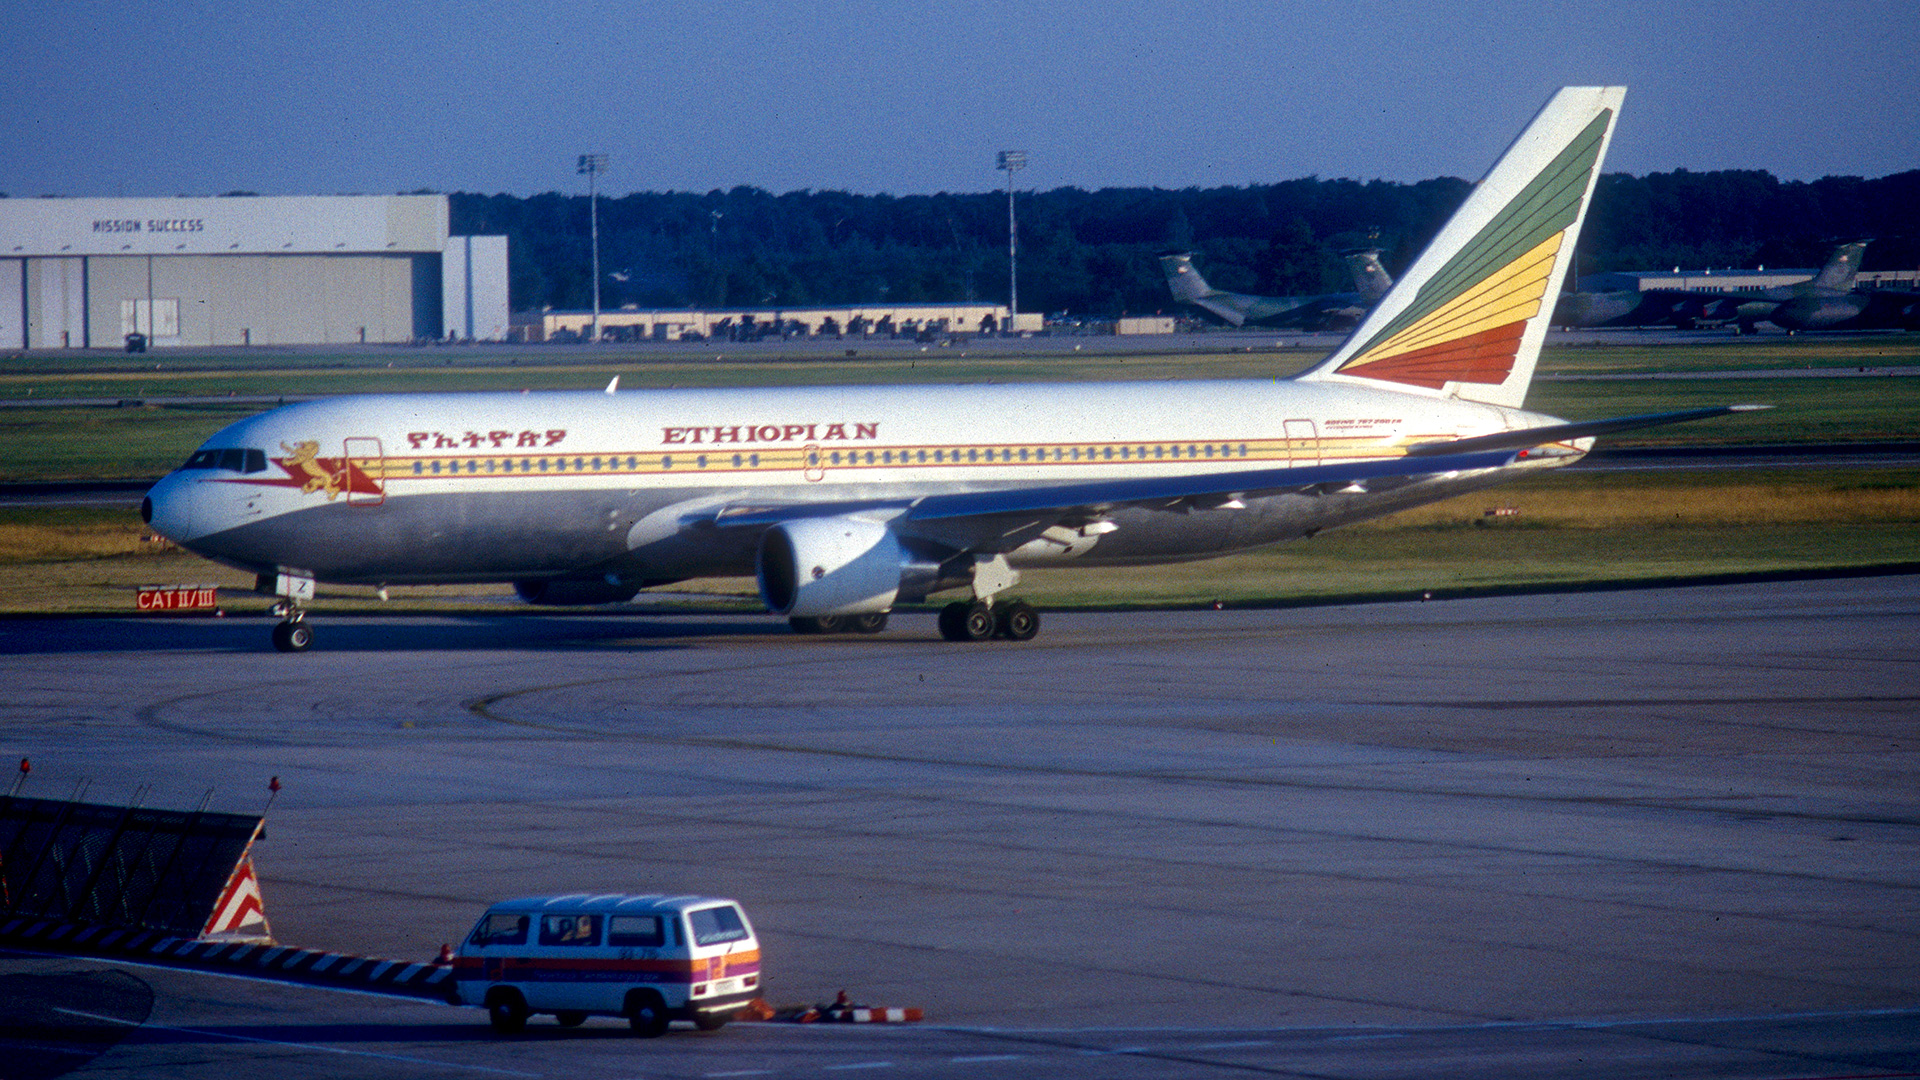 The Boeing 767 Aircraft That Was Later Involved In The Incident.  (Wikipedia)